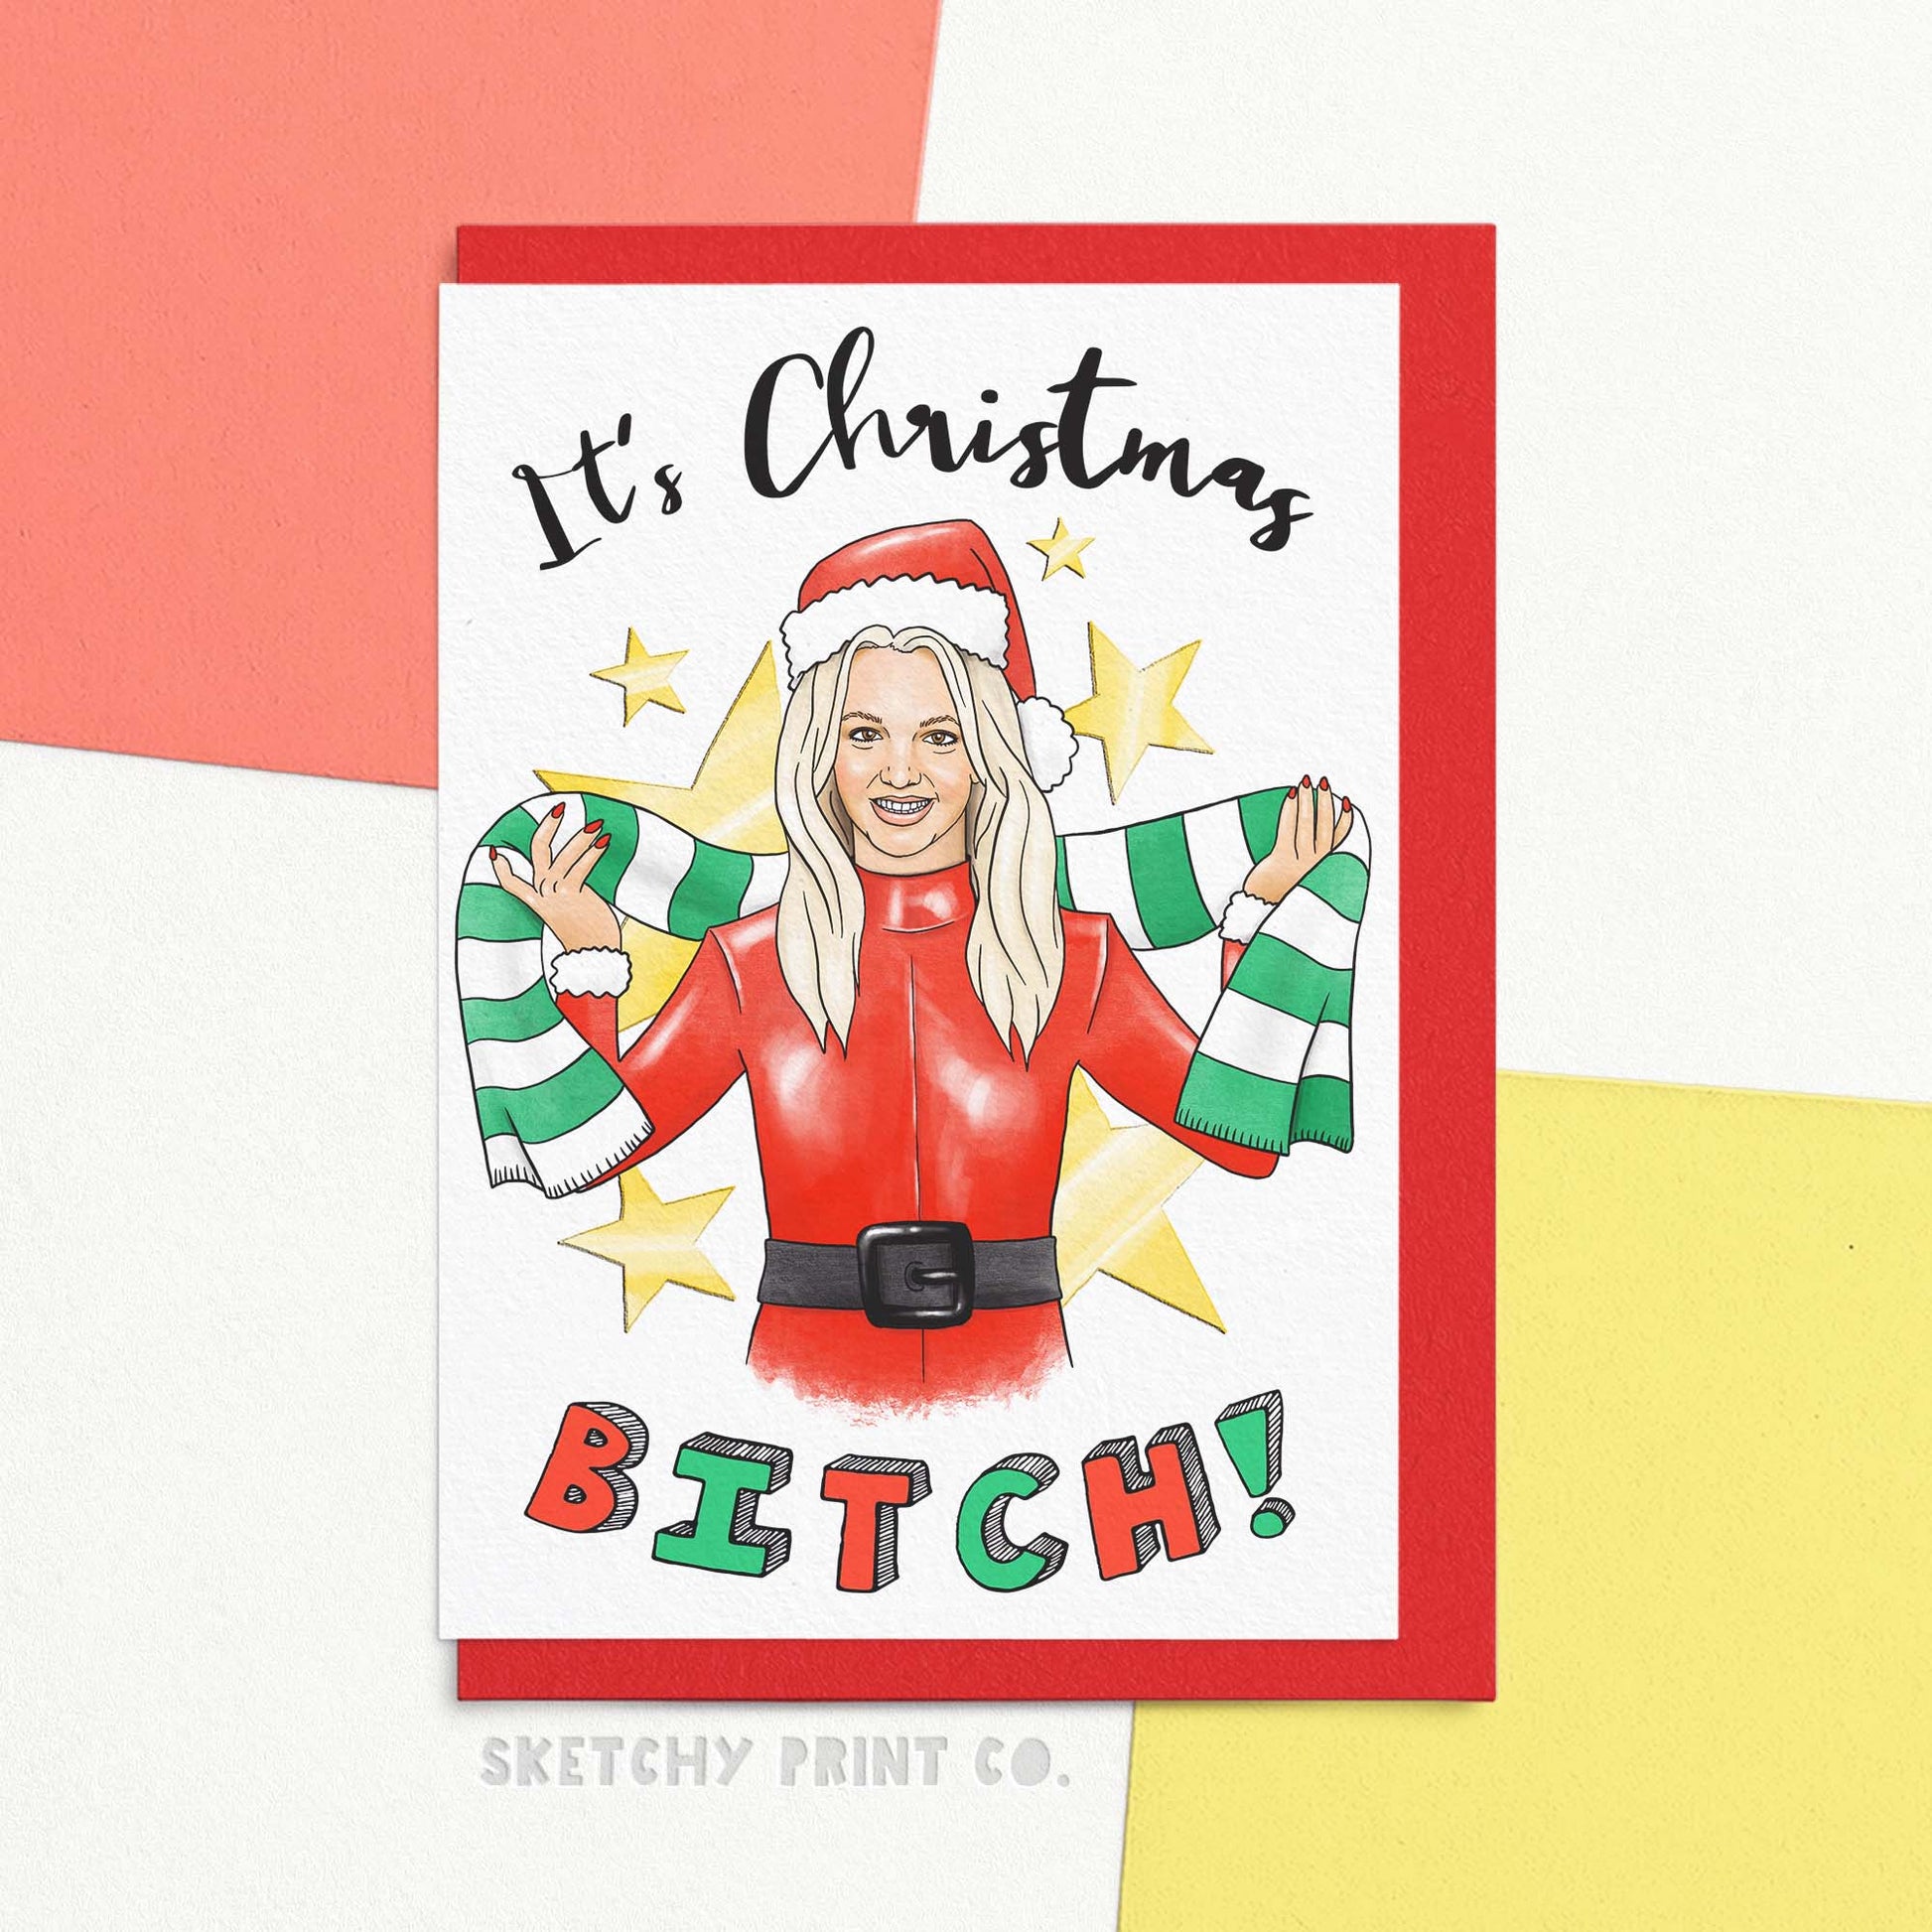 Funny Christmas wishes card reading it's Christmas B*tch! with an artists interpretation of a 90s icon wearing a Christmas hat and scarf. Wish your bestie merry Christmas wishes with this hilarious card that says it all: It's Christmas b*tch! Perfect for a playful and fun-loving friendship, this rude Christmas card will certainly bring some laughs and festive cheer. Spread the holiday spirit with a touch of sass.